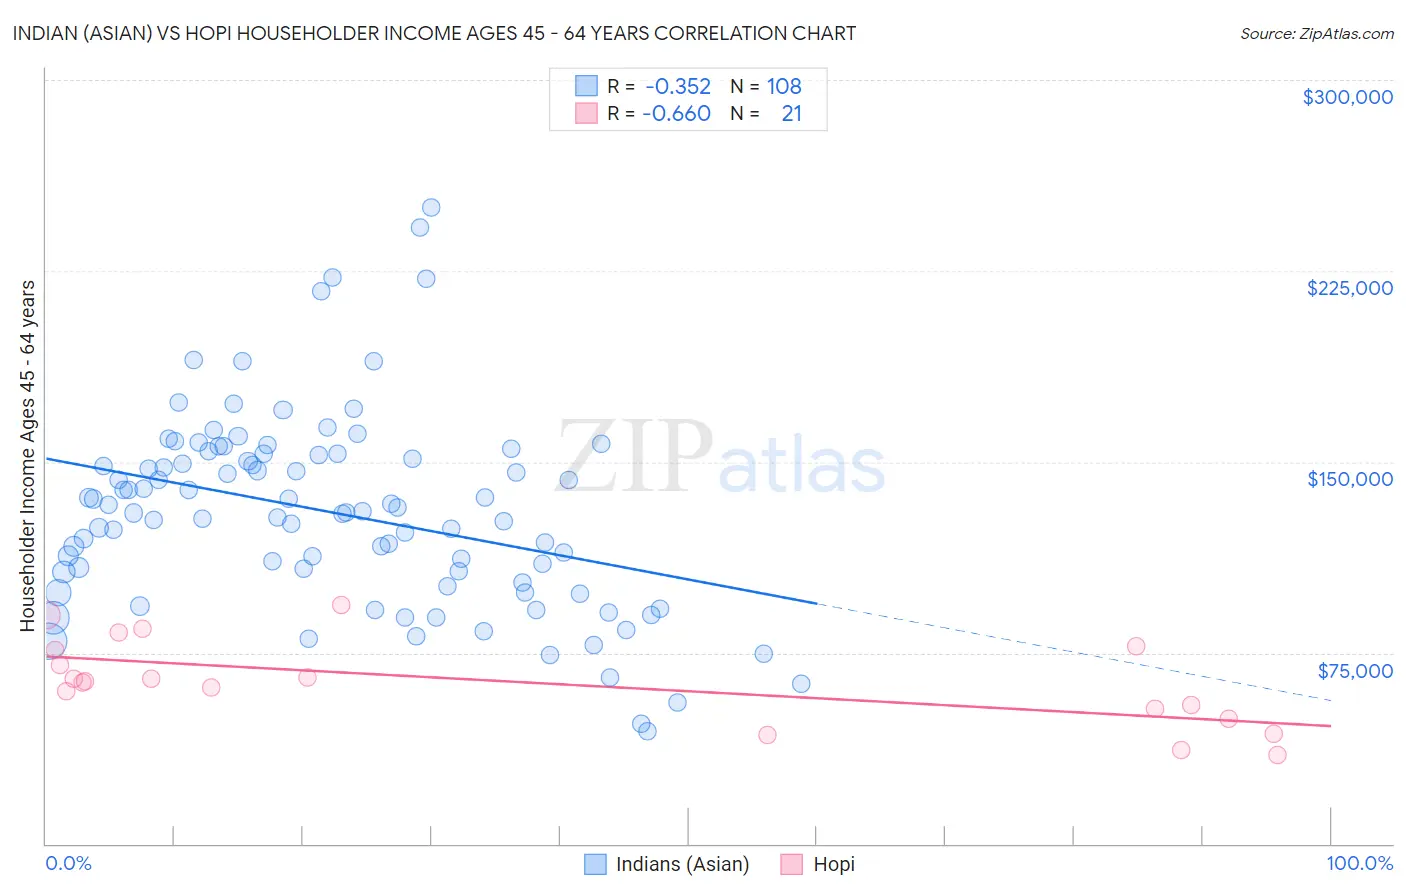 Indian (Asian) vs Hopi Householder Income Ages 45 - 64 years